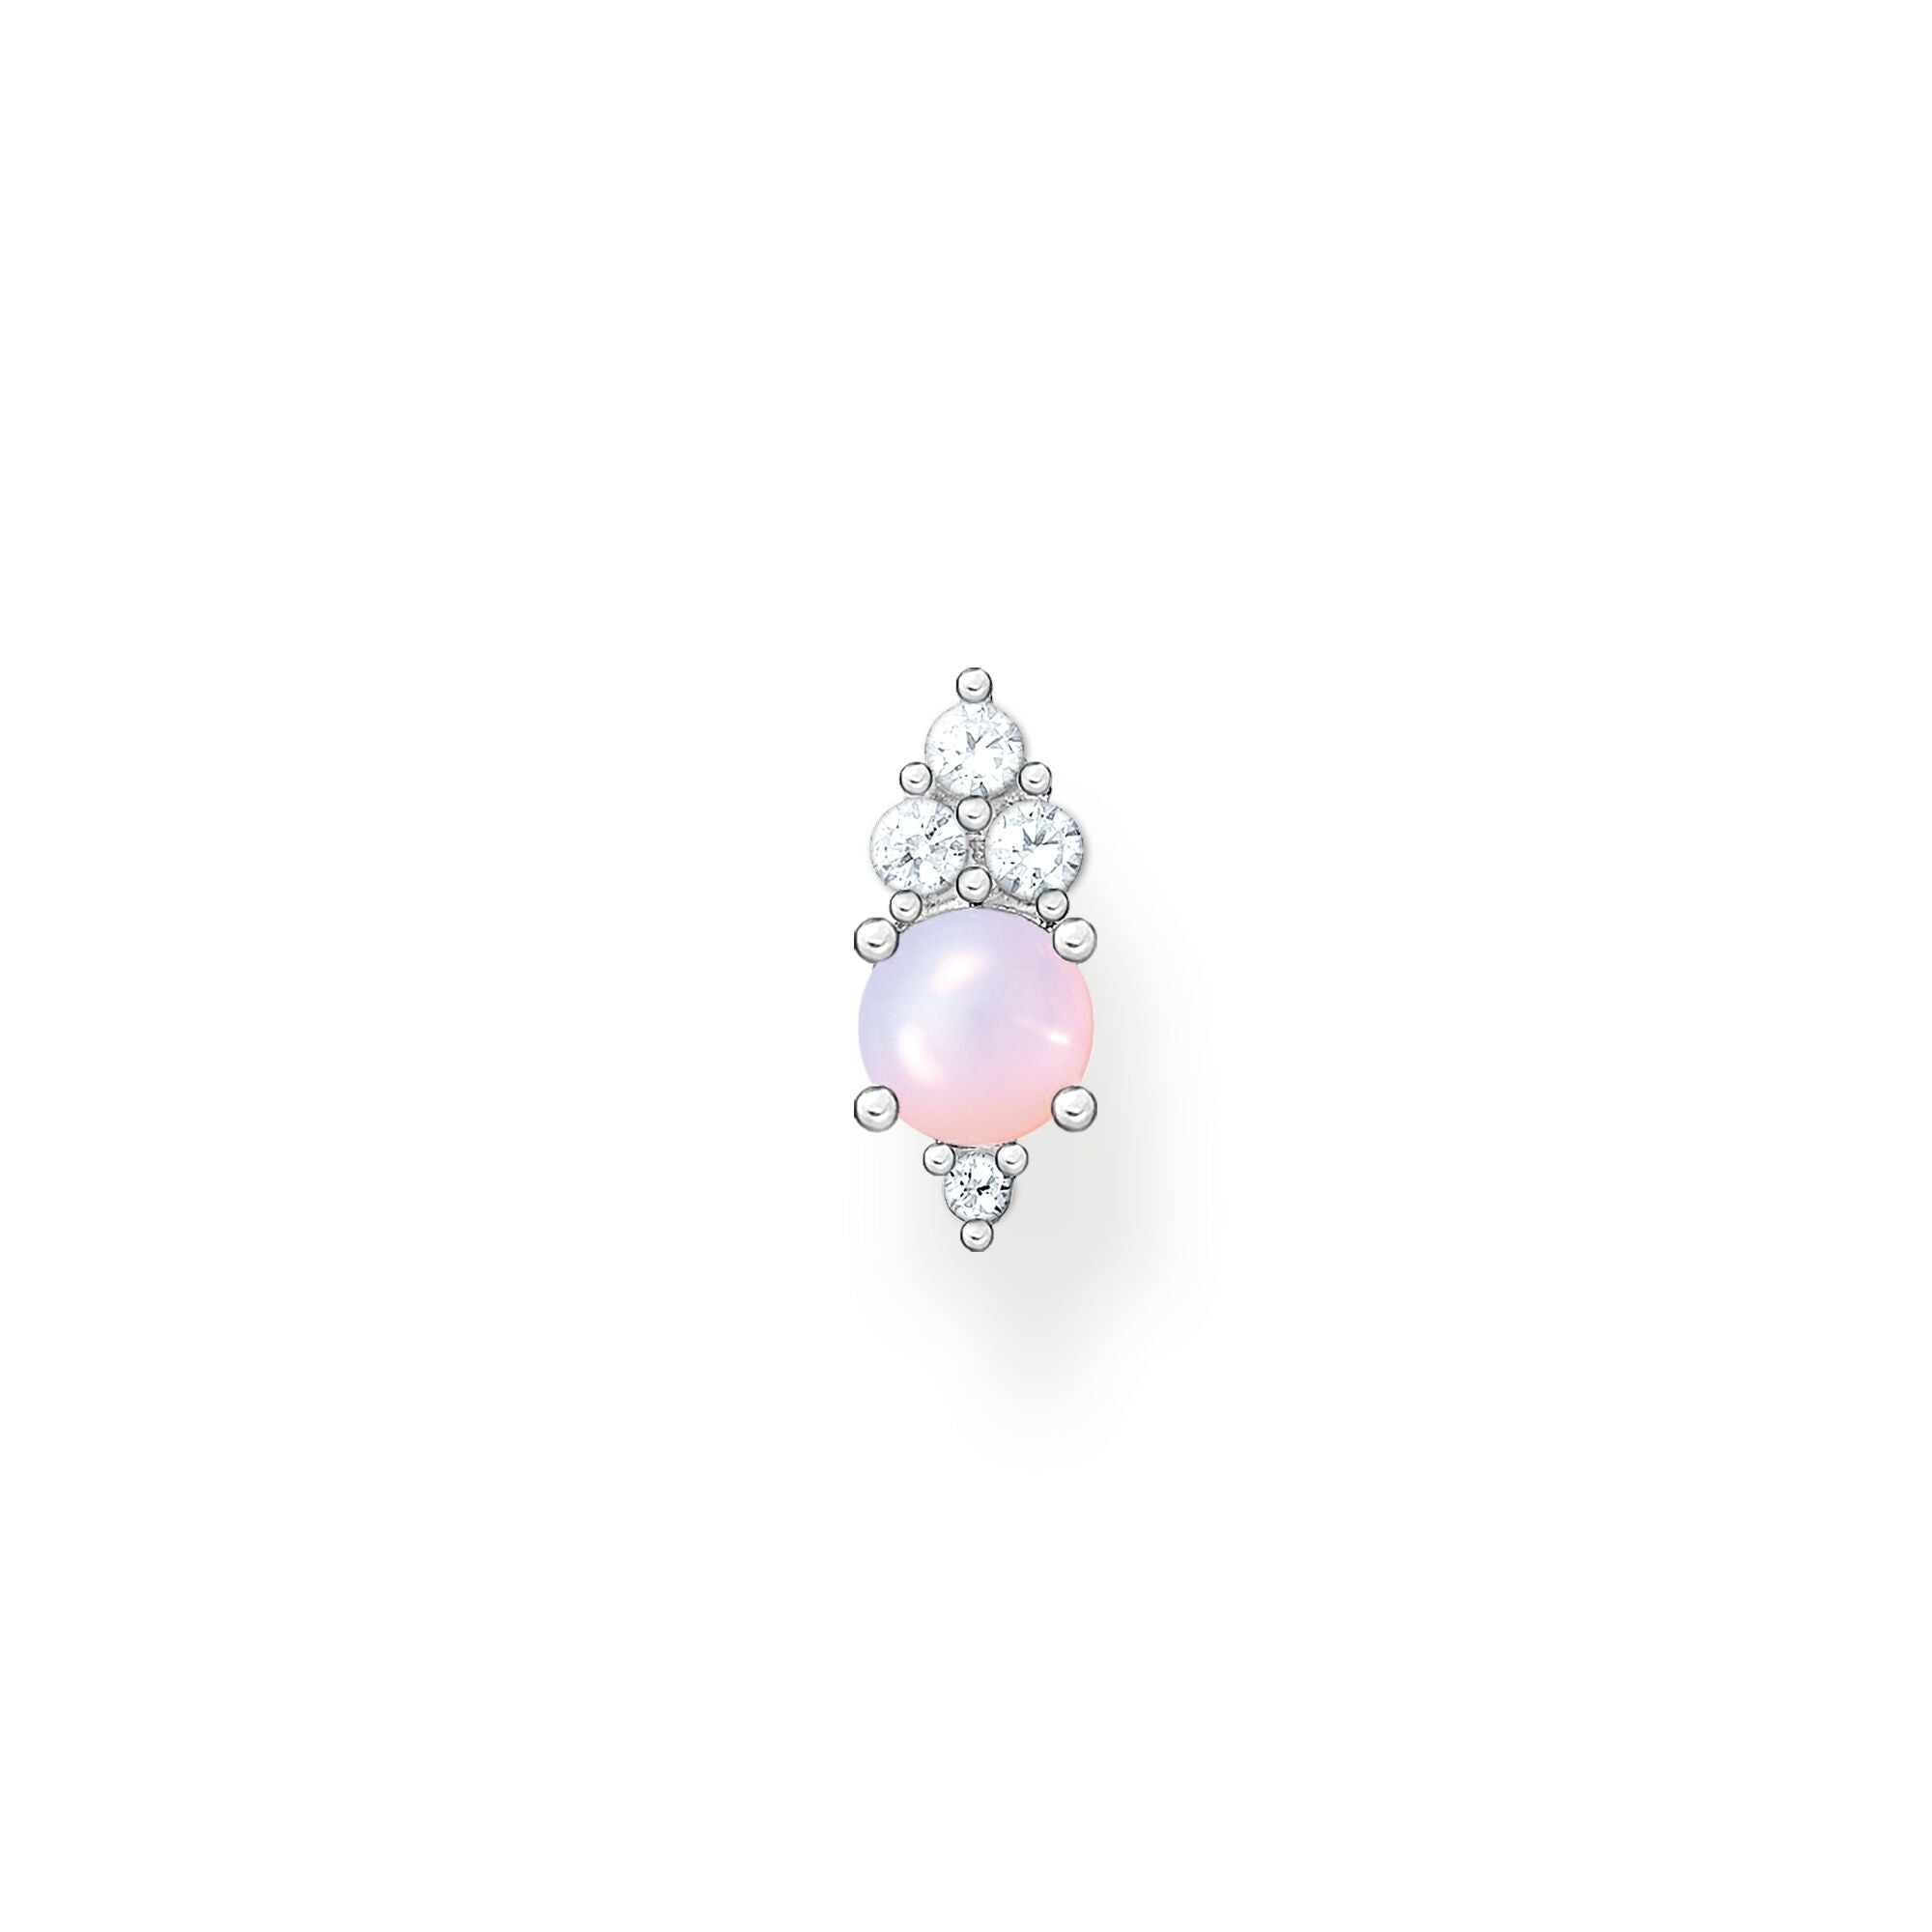 Thomas Sabo sterling silver and pink opal effect stone, white cz single stud earring